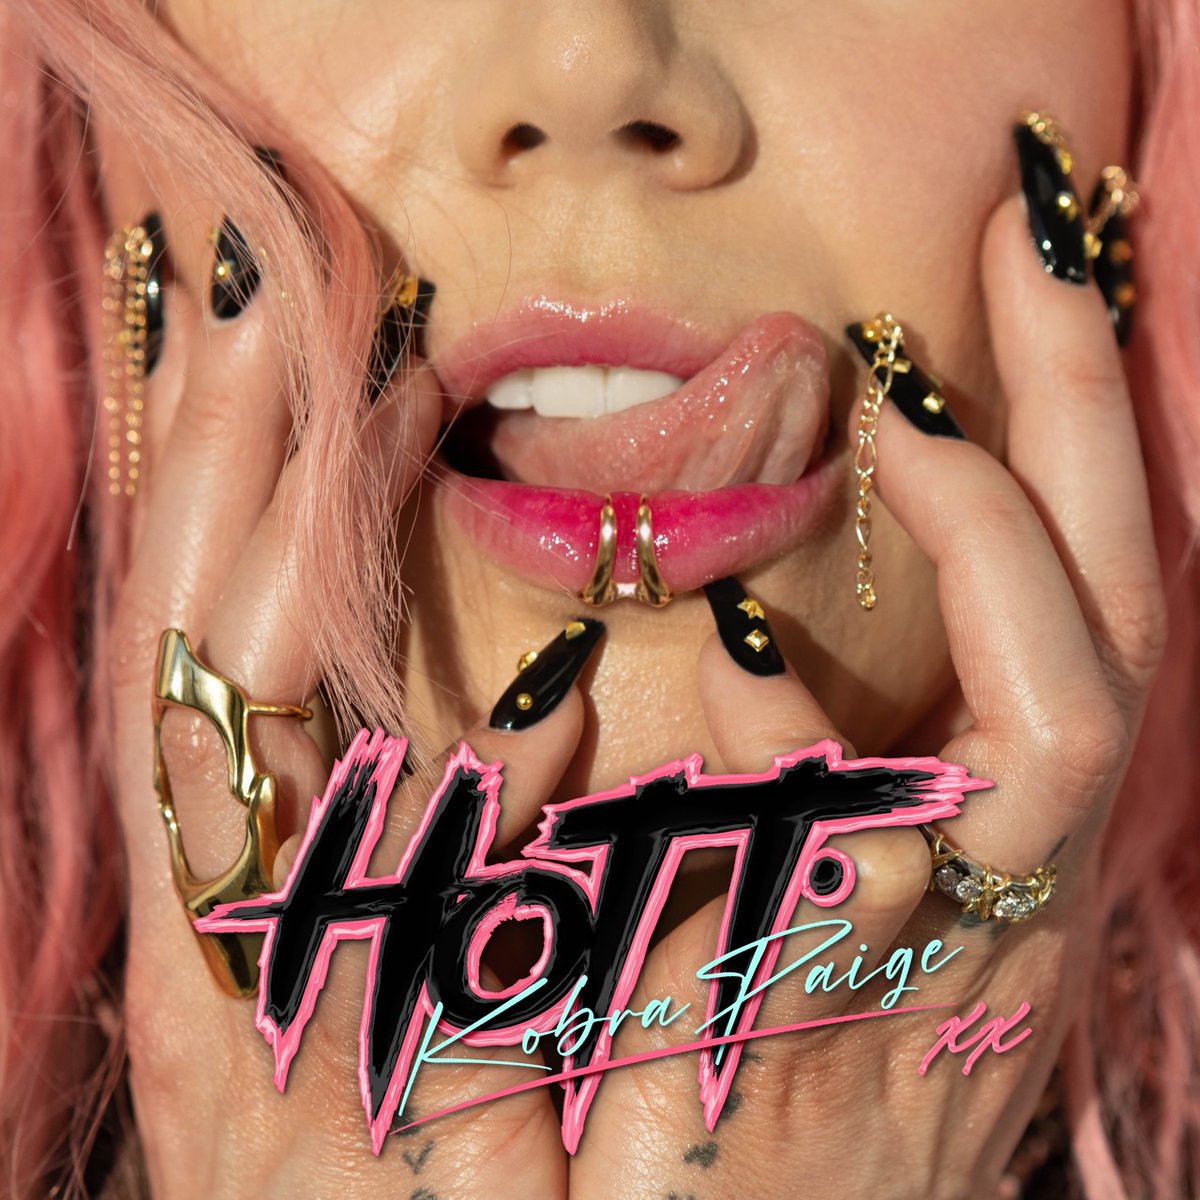 ‘HOTT.’ ❤️‍🔥 OUT NOW🤟🤩 I’ve been waiting to light a fire under some asses w/ this song for 2 years.
HOTT. is about navigating our sense of self-worth in an extraordinarily convoluted era of social media domination. kobrapaige.com/hott

#hott #factorfunded #grateful #lightitup